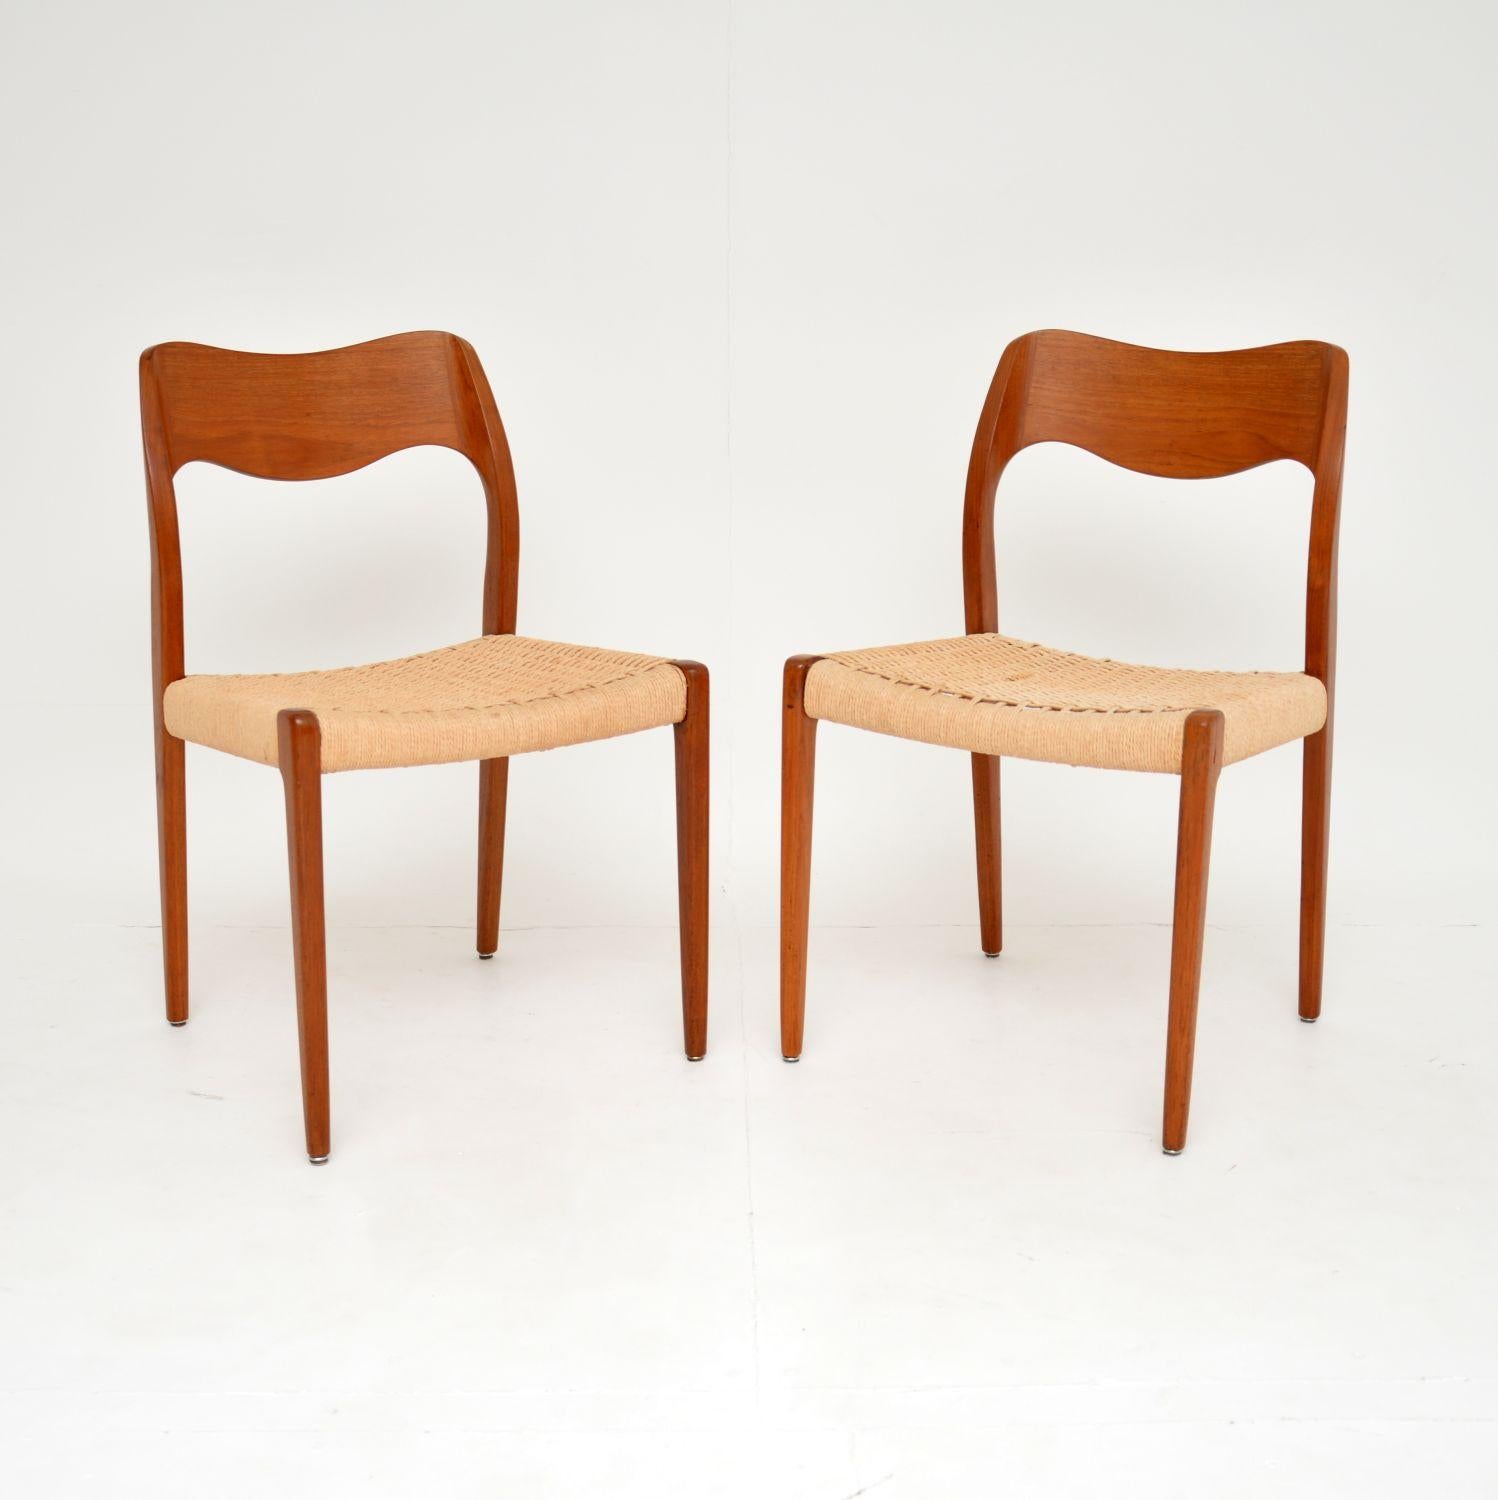 An exceptionally stylish and iconic pair of Danish teak model 71 chairs by Niels Moller. They were originally designed in 1951, this pair dates from around the 1960’s.

The solid teak frames are beautifully hand crafted, with a sculptural and